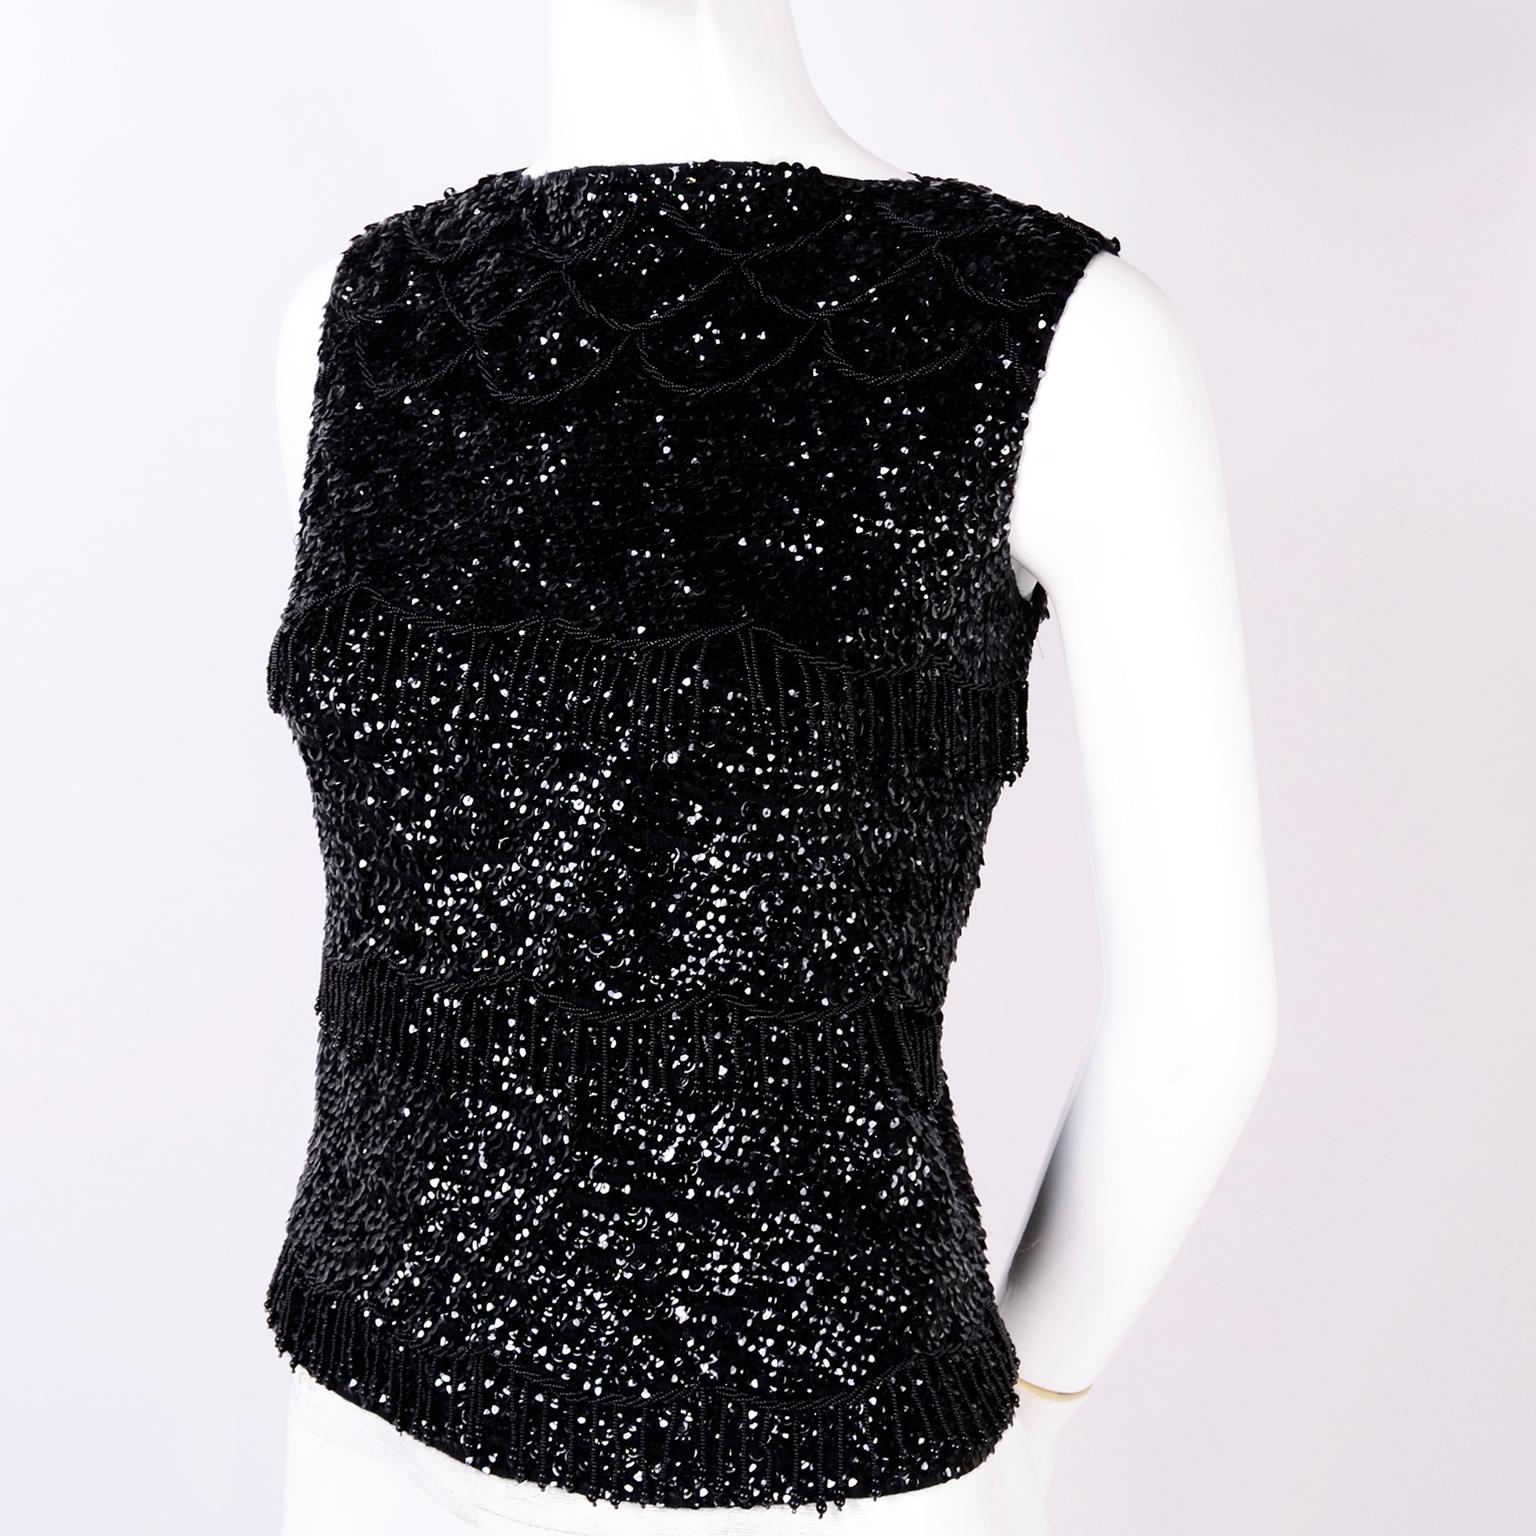 Women's 1960s Black Beaded Vintage Top With Fringe Made in Hong Kong